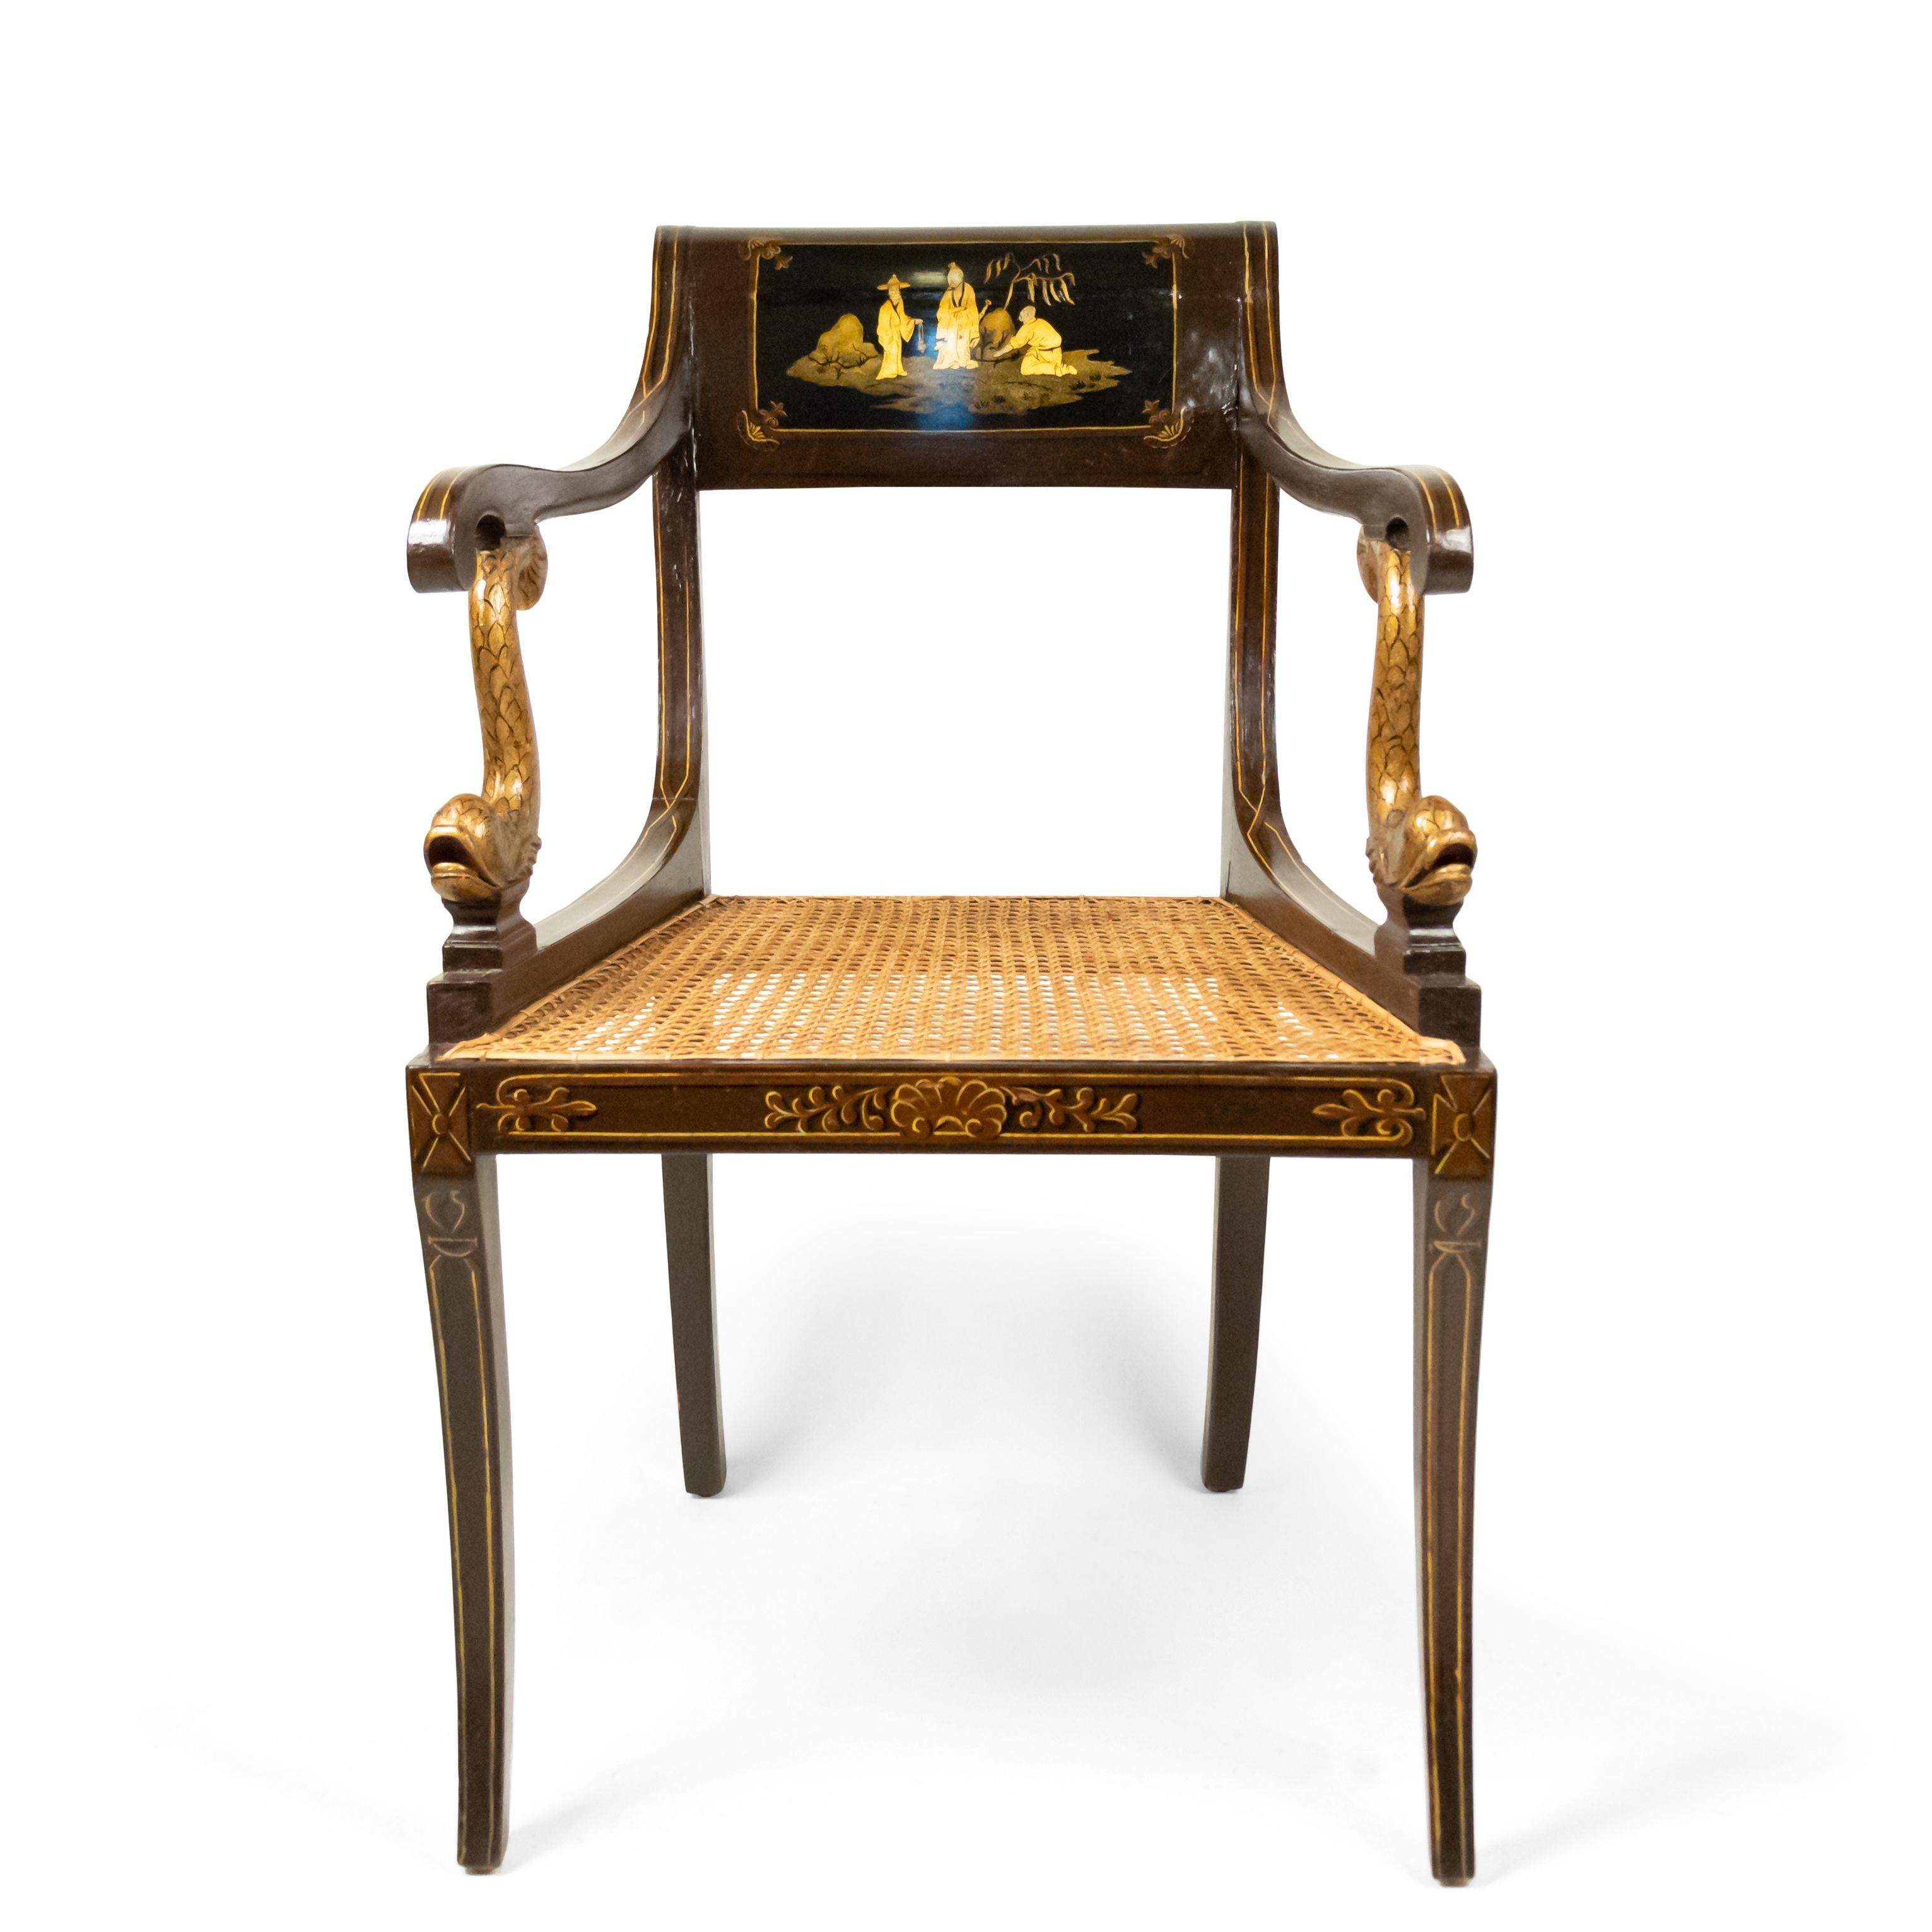 Pair of English Regency brown lacquered chinoiserie design armchairs with dolphin arms.